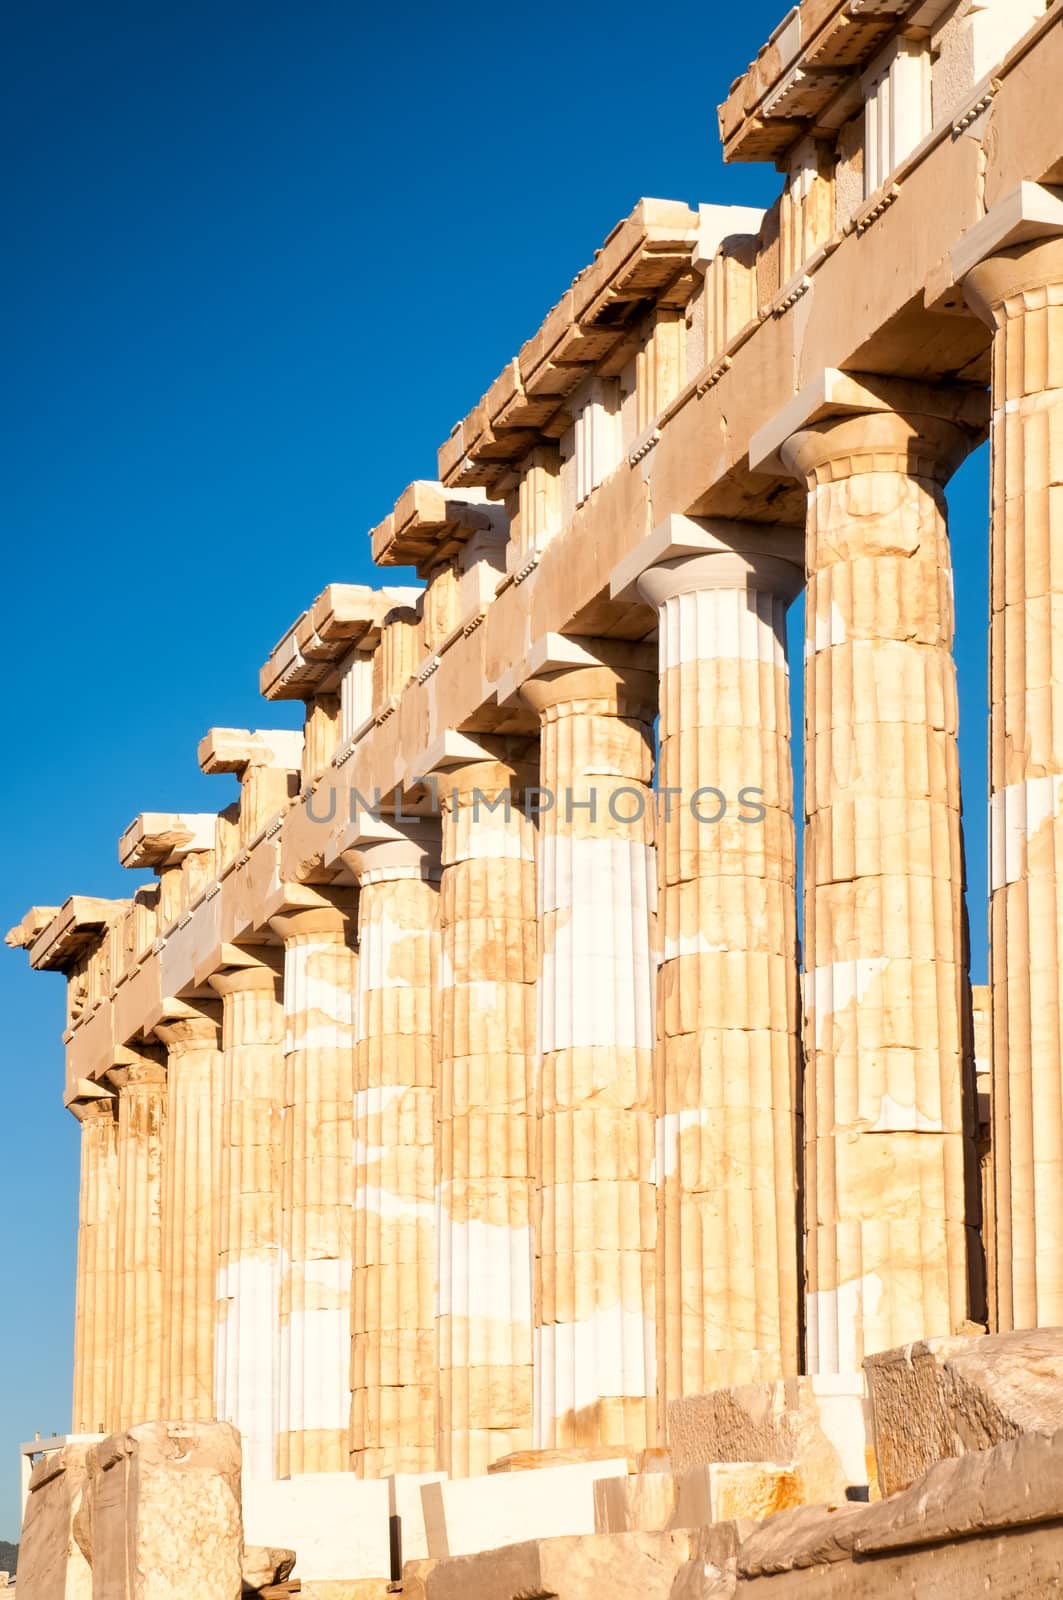 The Partenon in Athens, Greece by mitakag